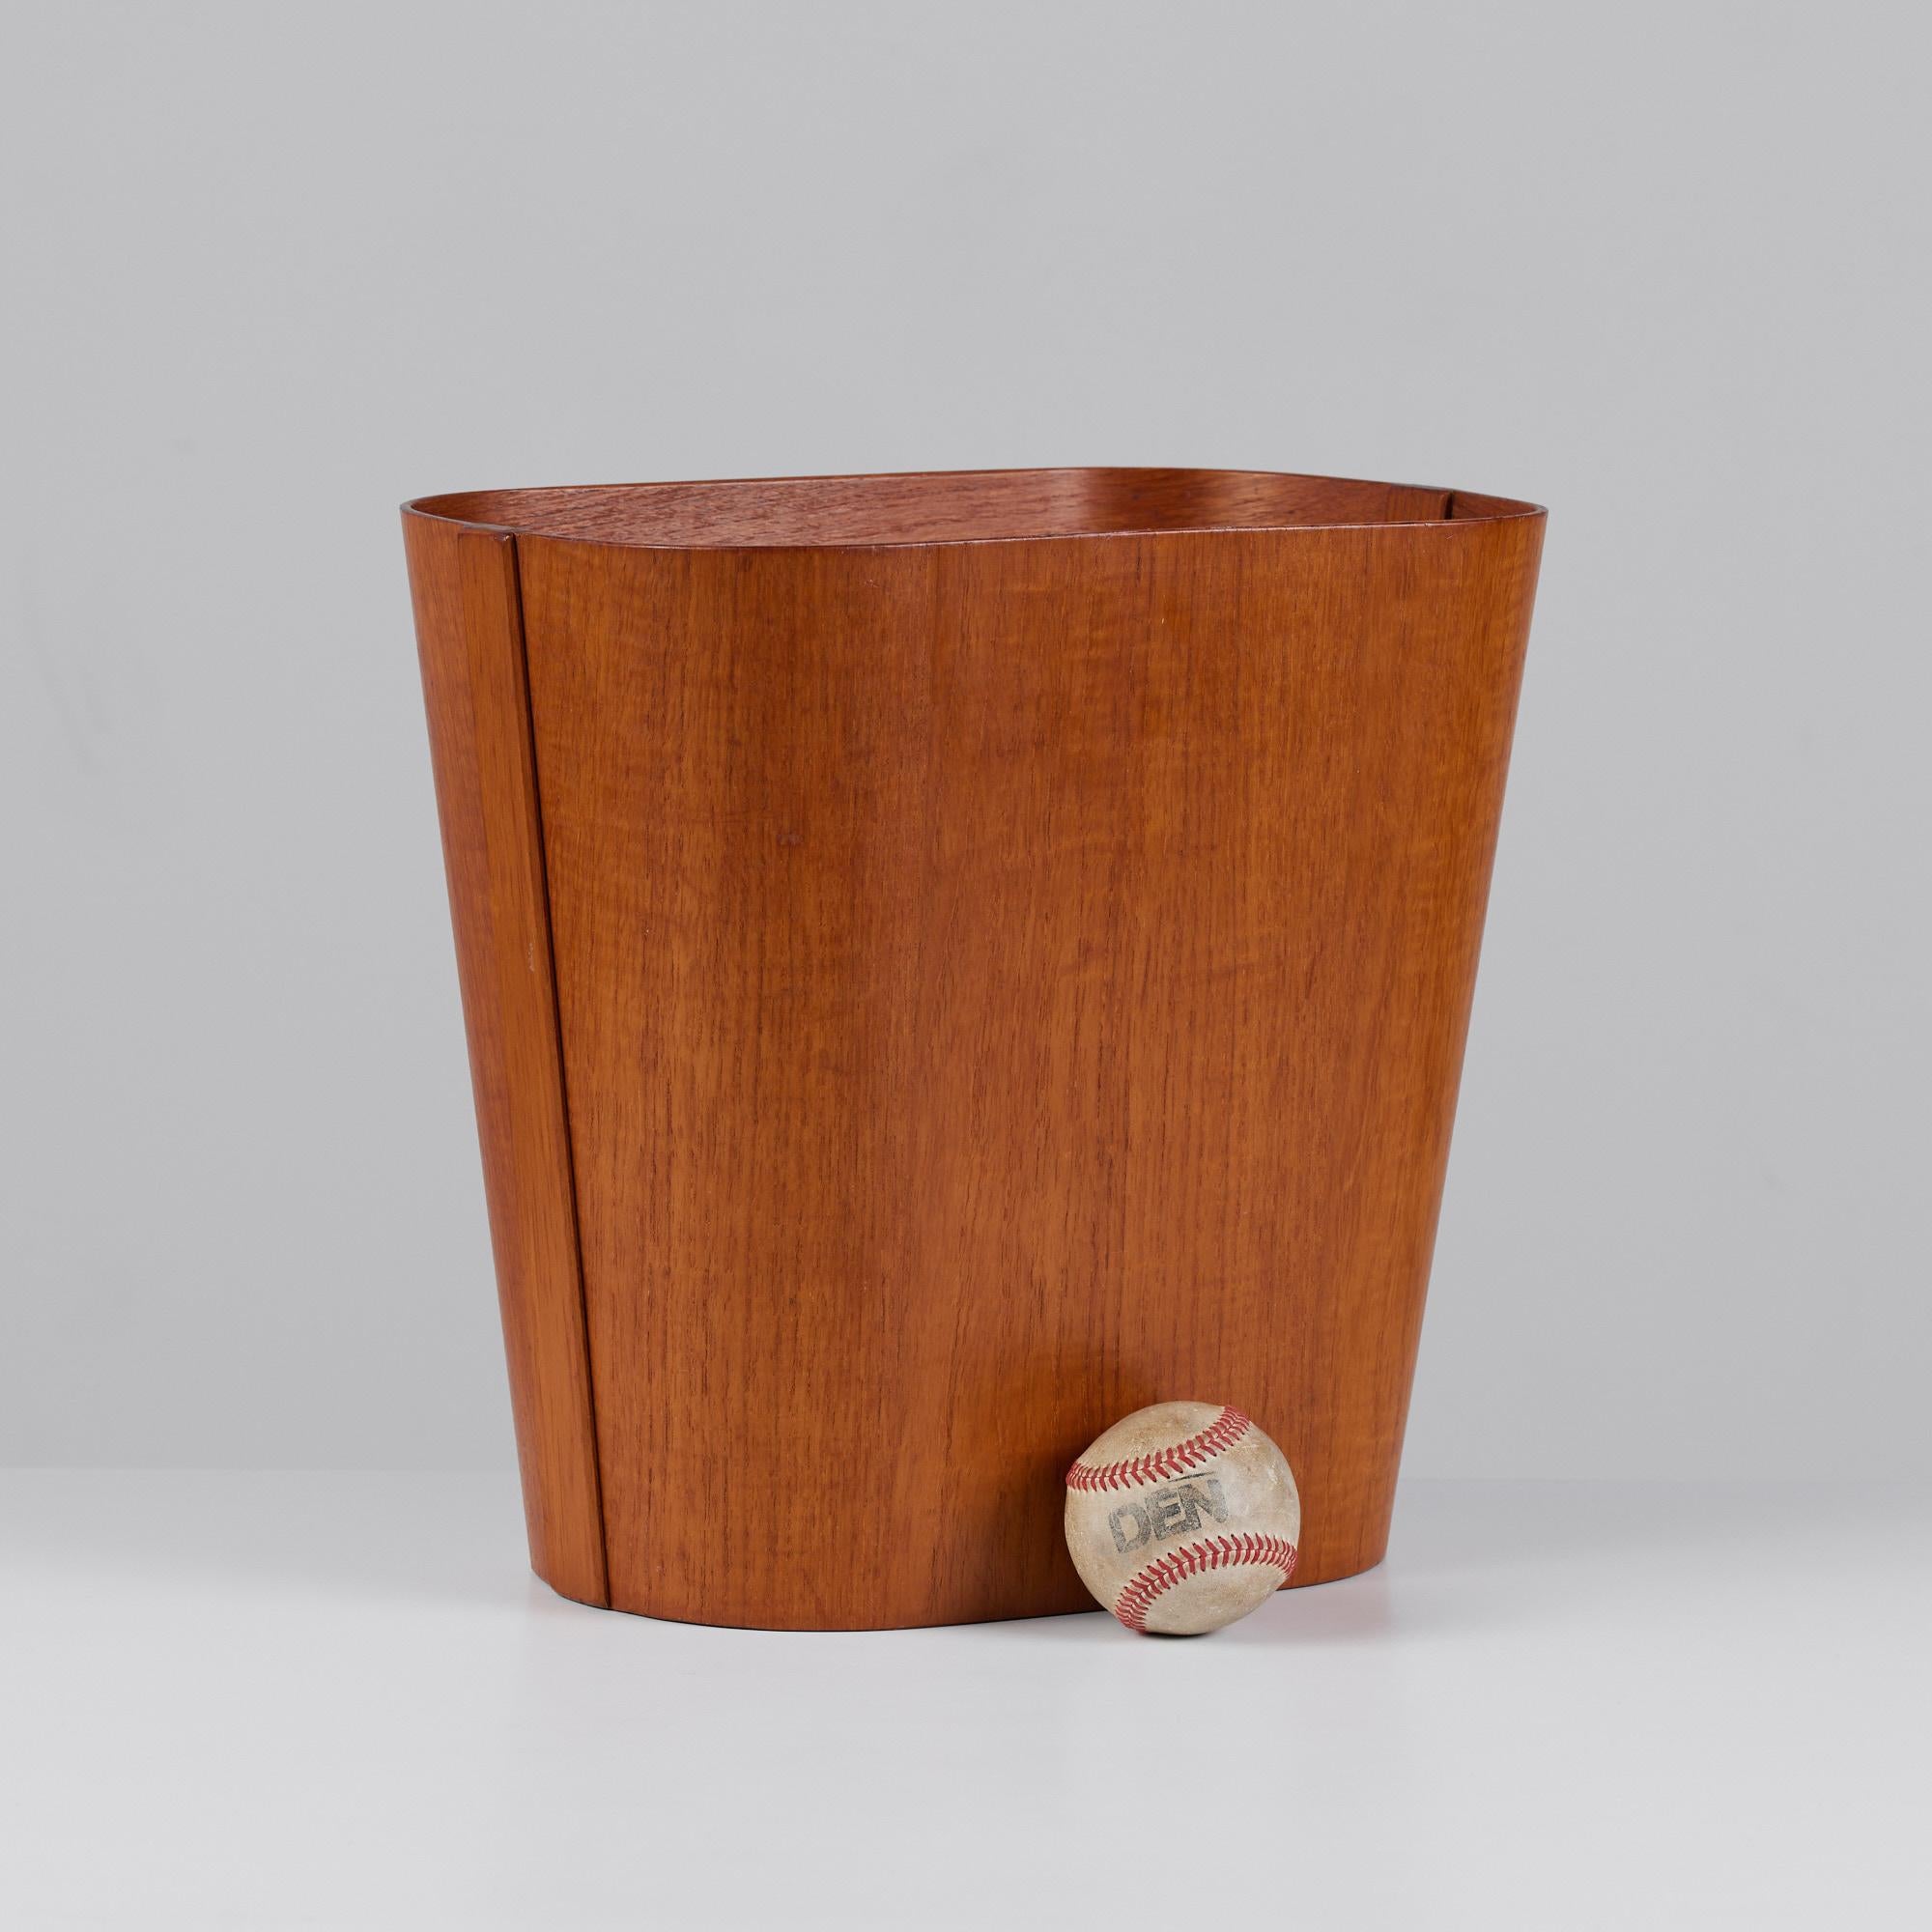 Teak wastebasket by Beni Mobler, c.1960s, Denmark. This bin features a thin rectangular teak plywood body joined together by solid teak strips at each side.

Dimensions: ?14